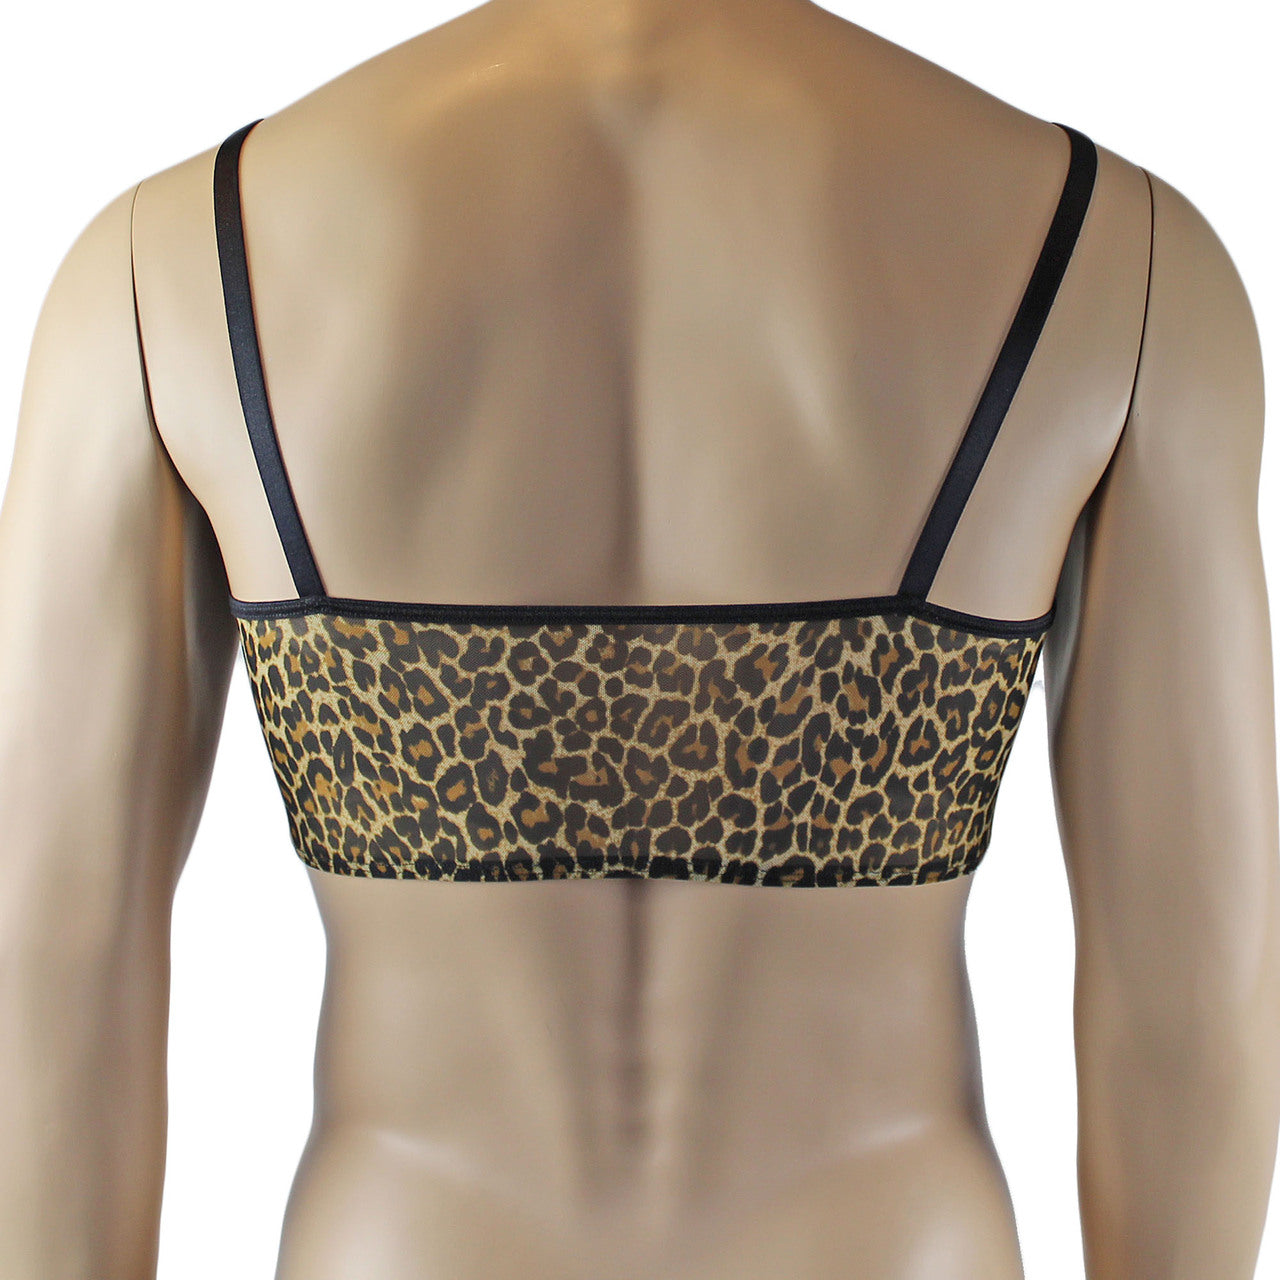 LAST ORDERS - Mens Leopard Lingerie Animal Print Camisole Top & Thong